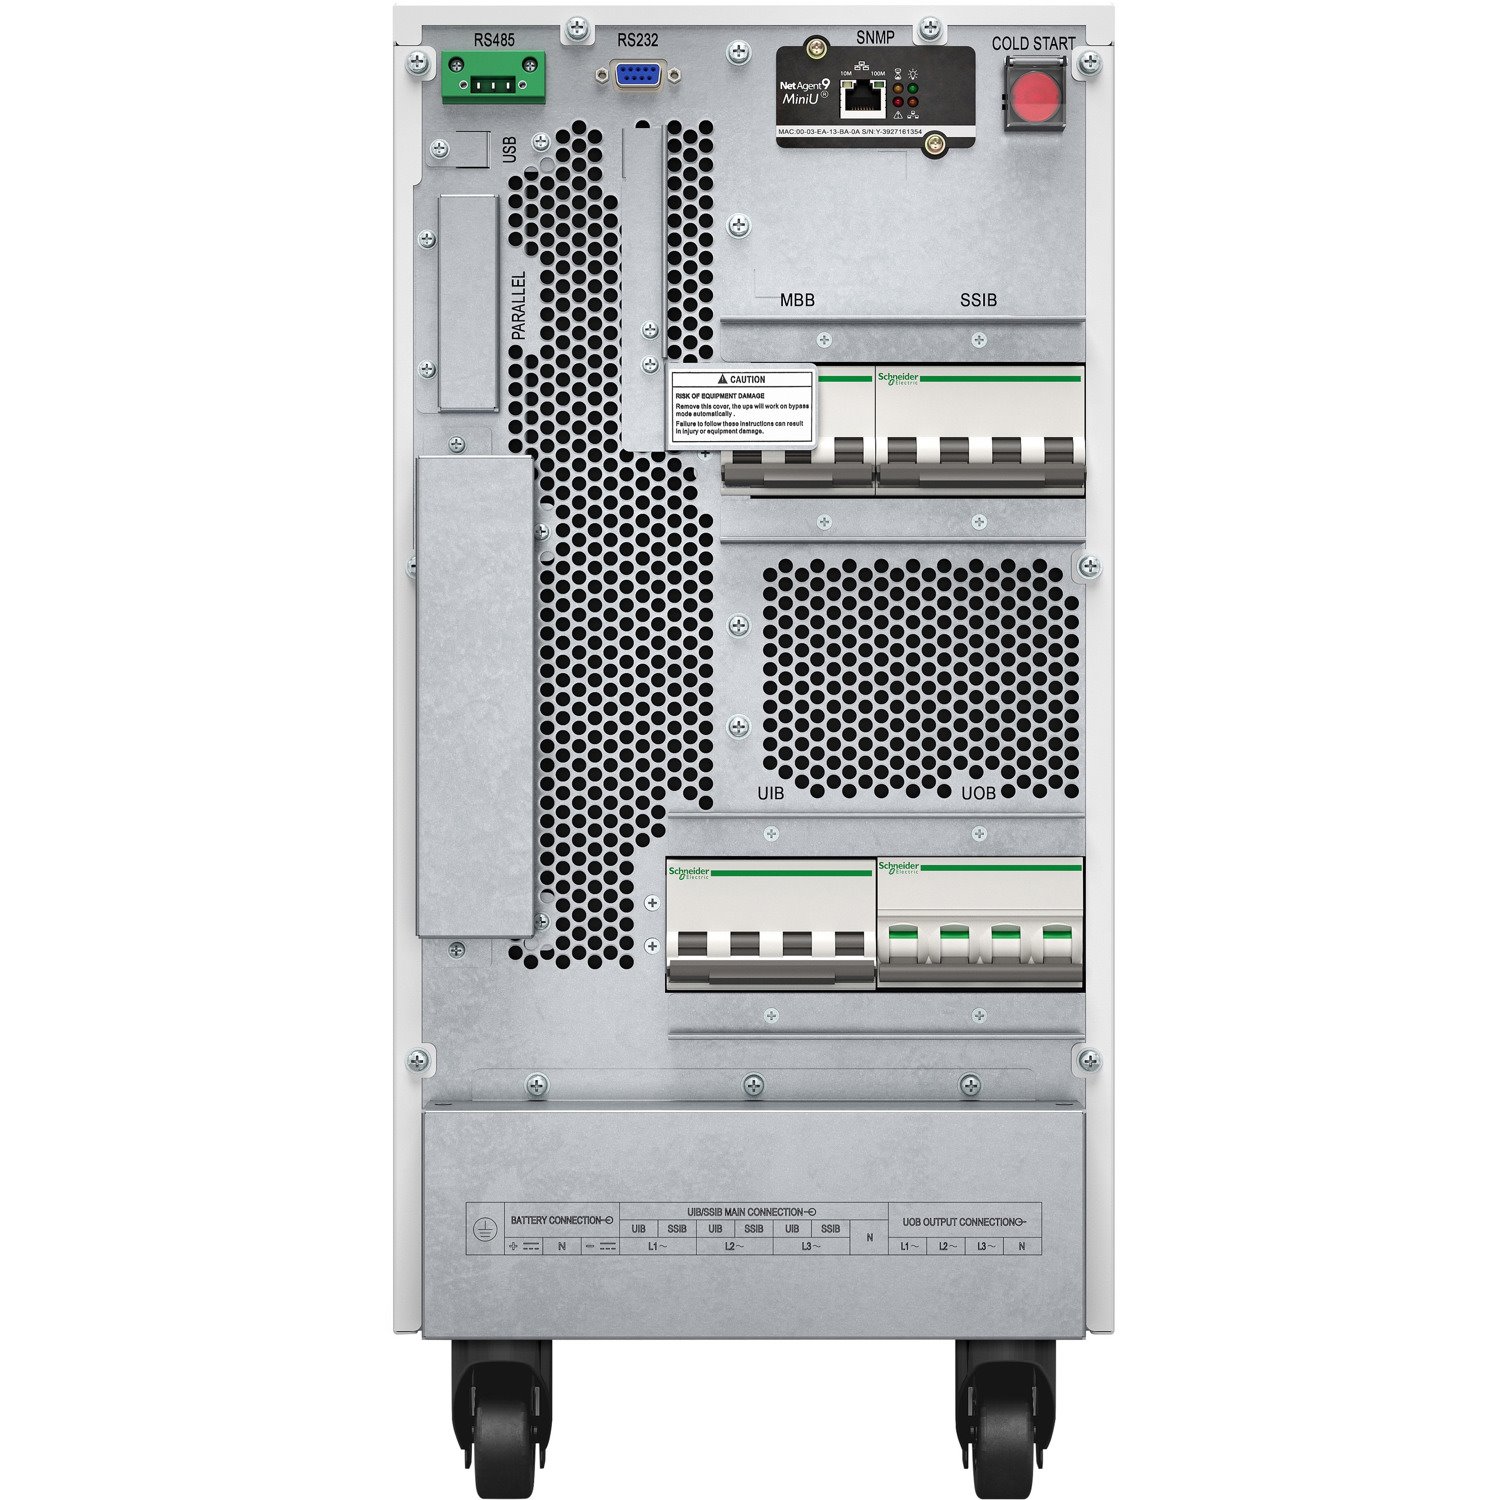 APC by Schneider Electric Easy UPS 3S Parallel Kit